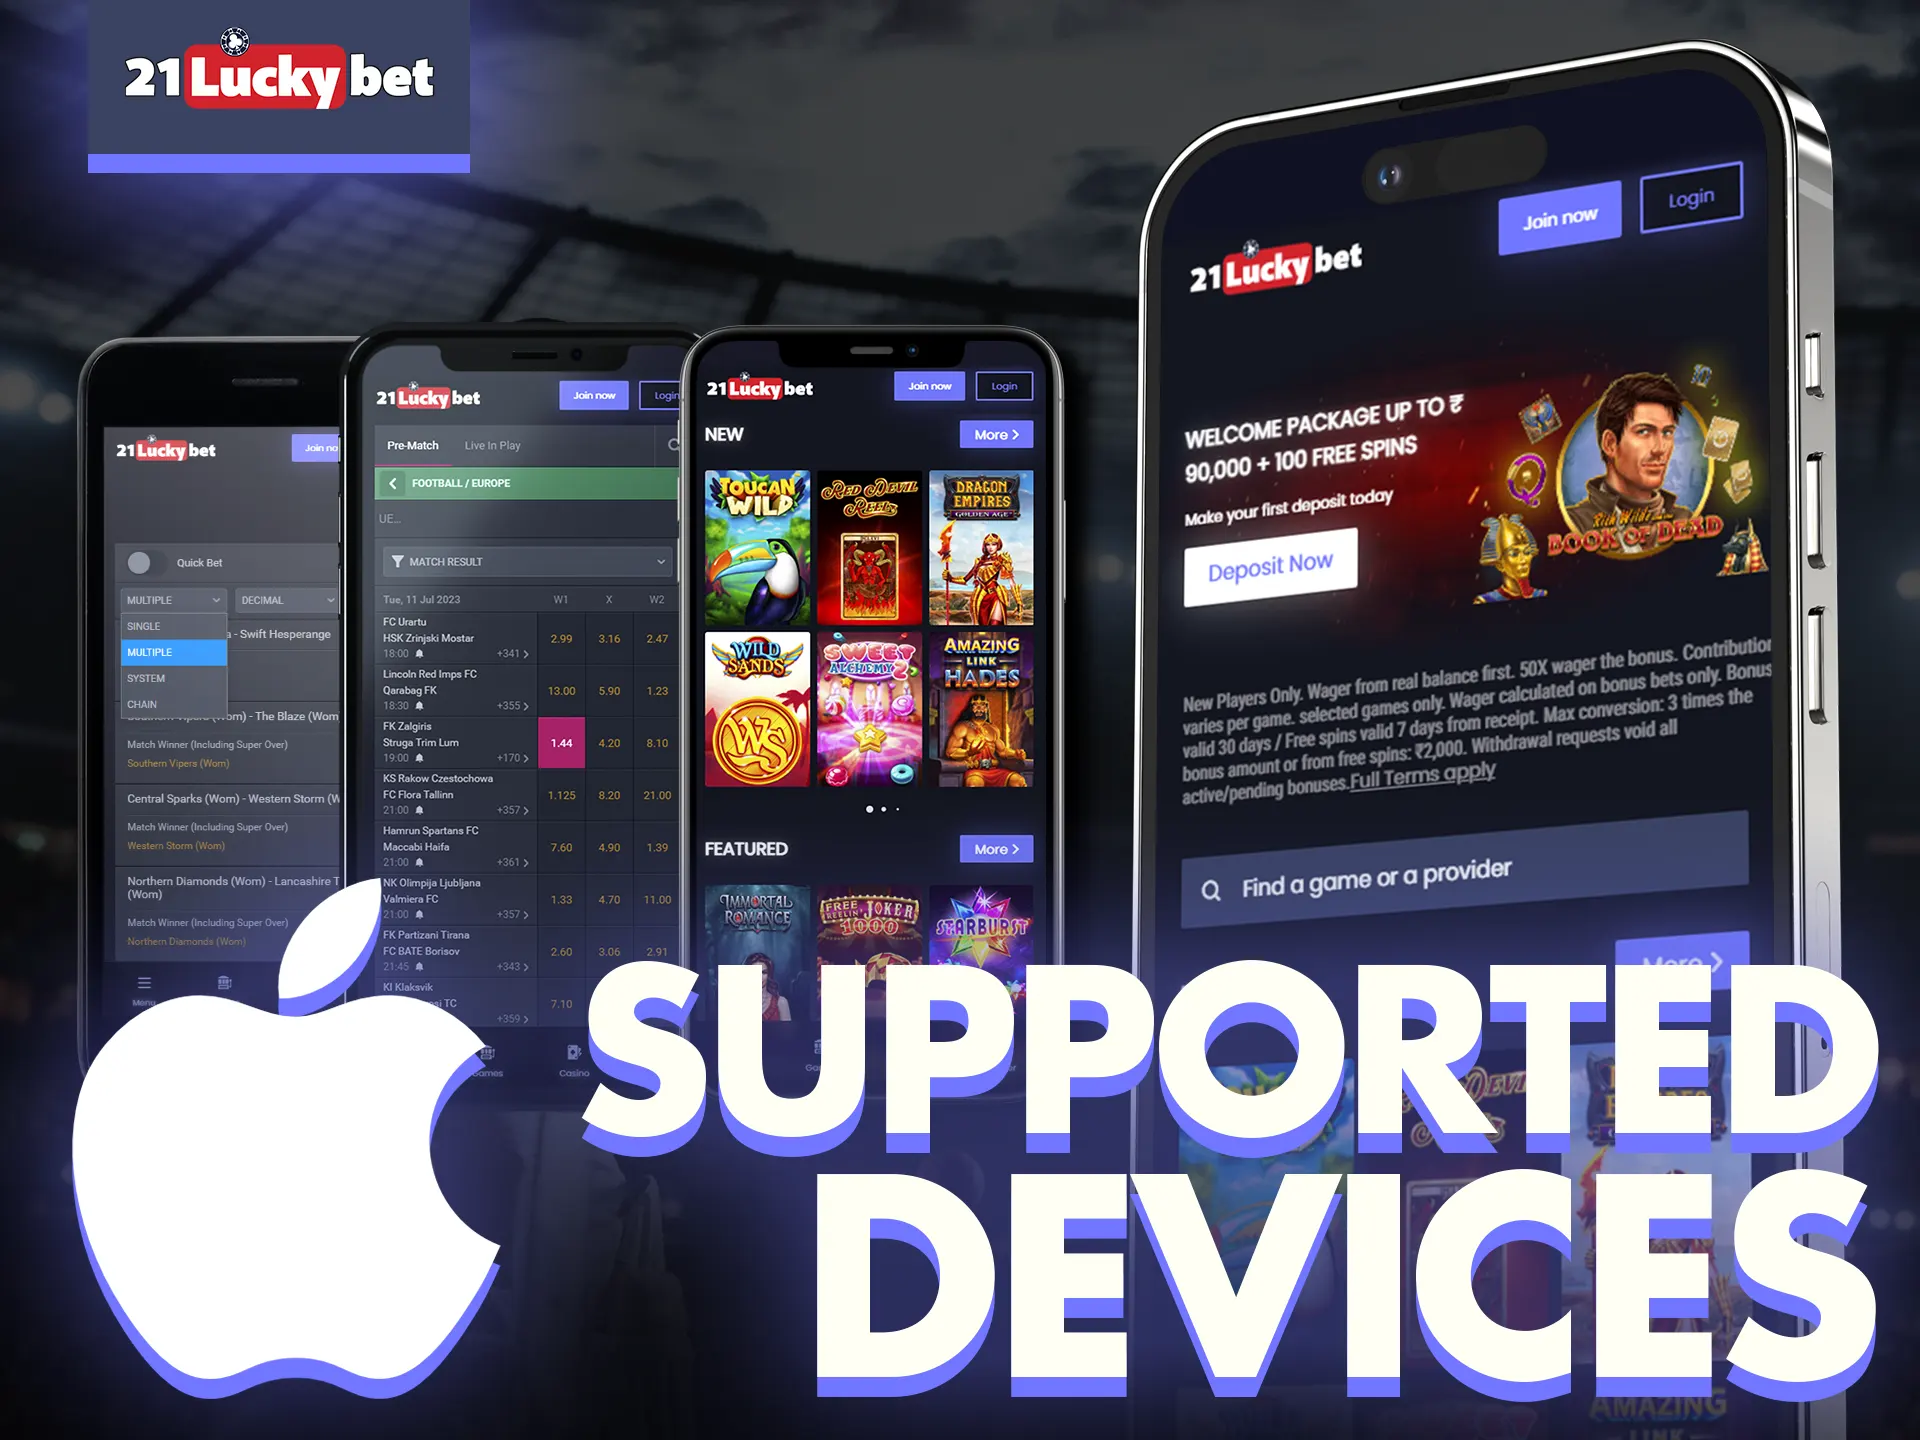 The 21luckybet app is supported on a variety of iOS devices.